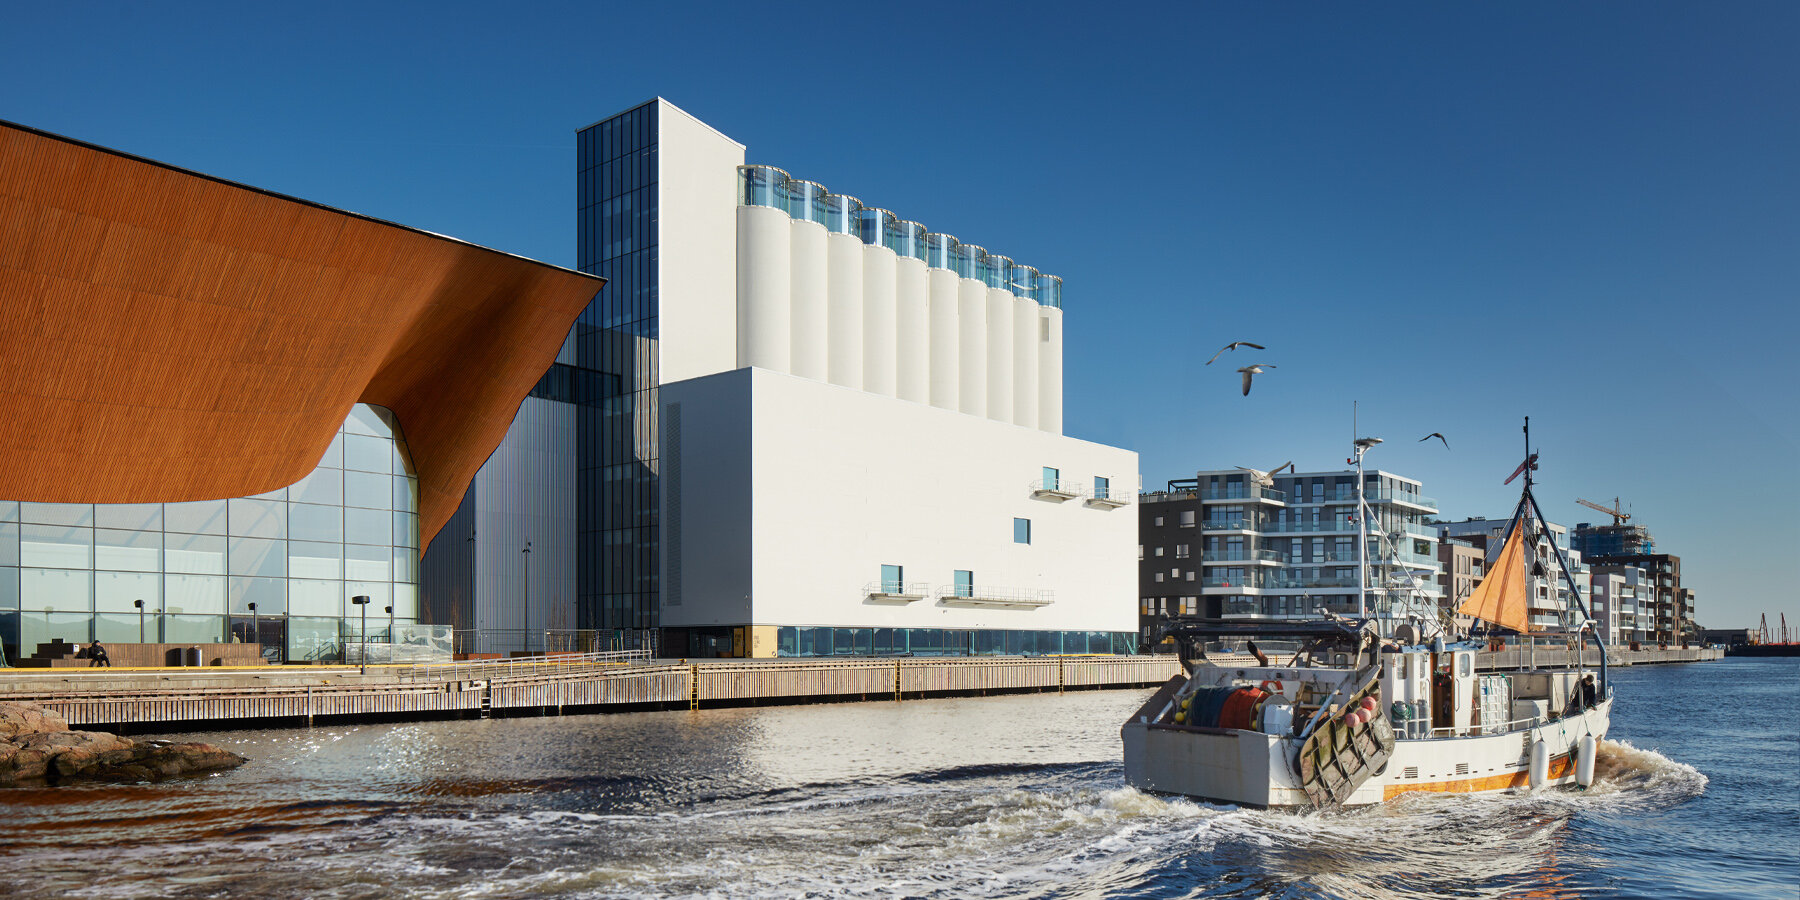 kunstsilo museum takes shape in southern norway as a converted grain silo from...